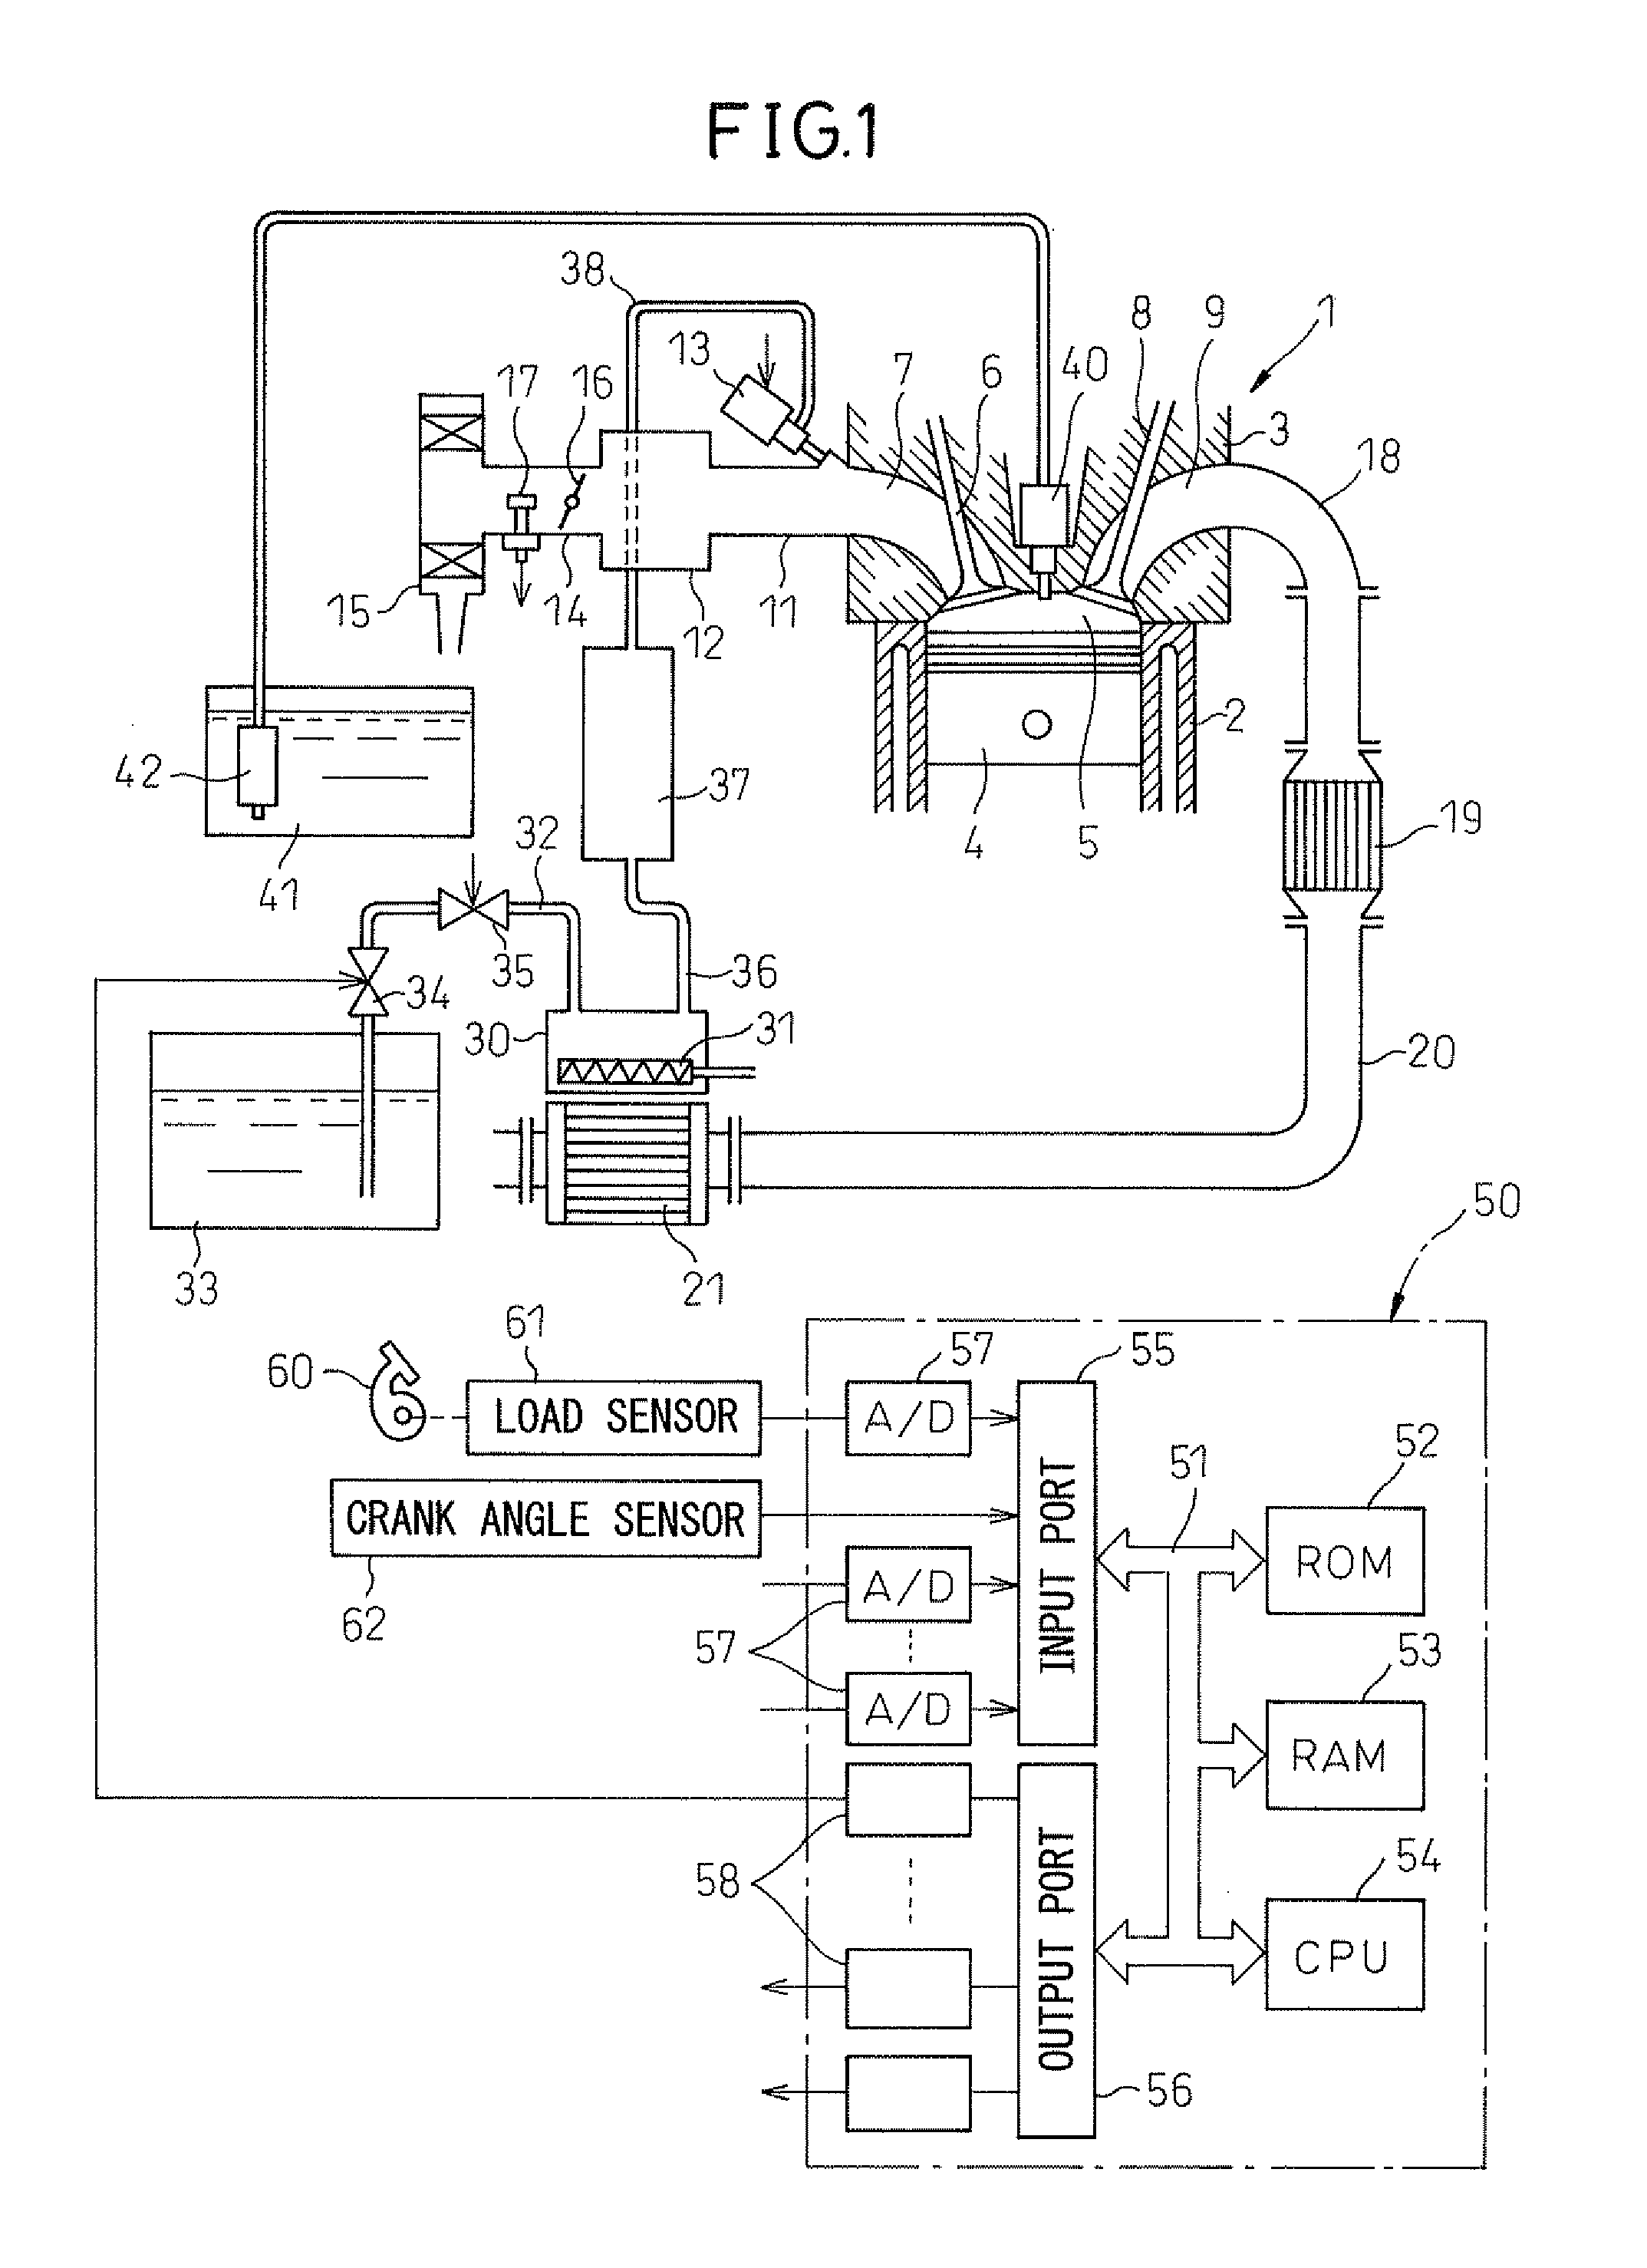 Control system of internal combustion engine